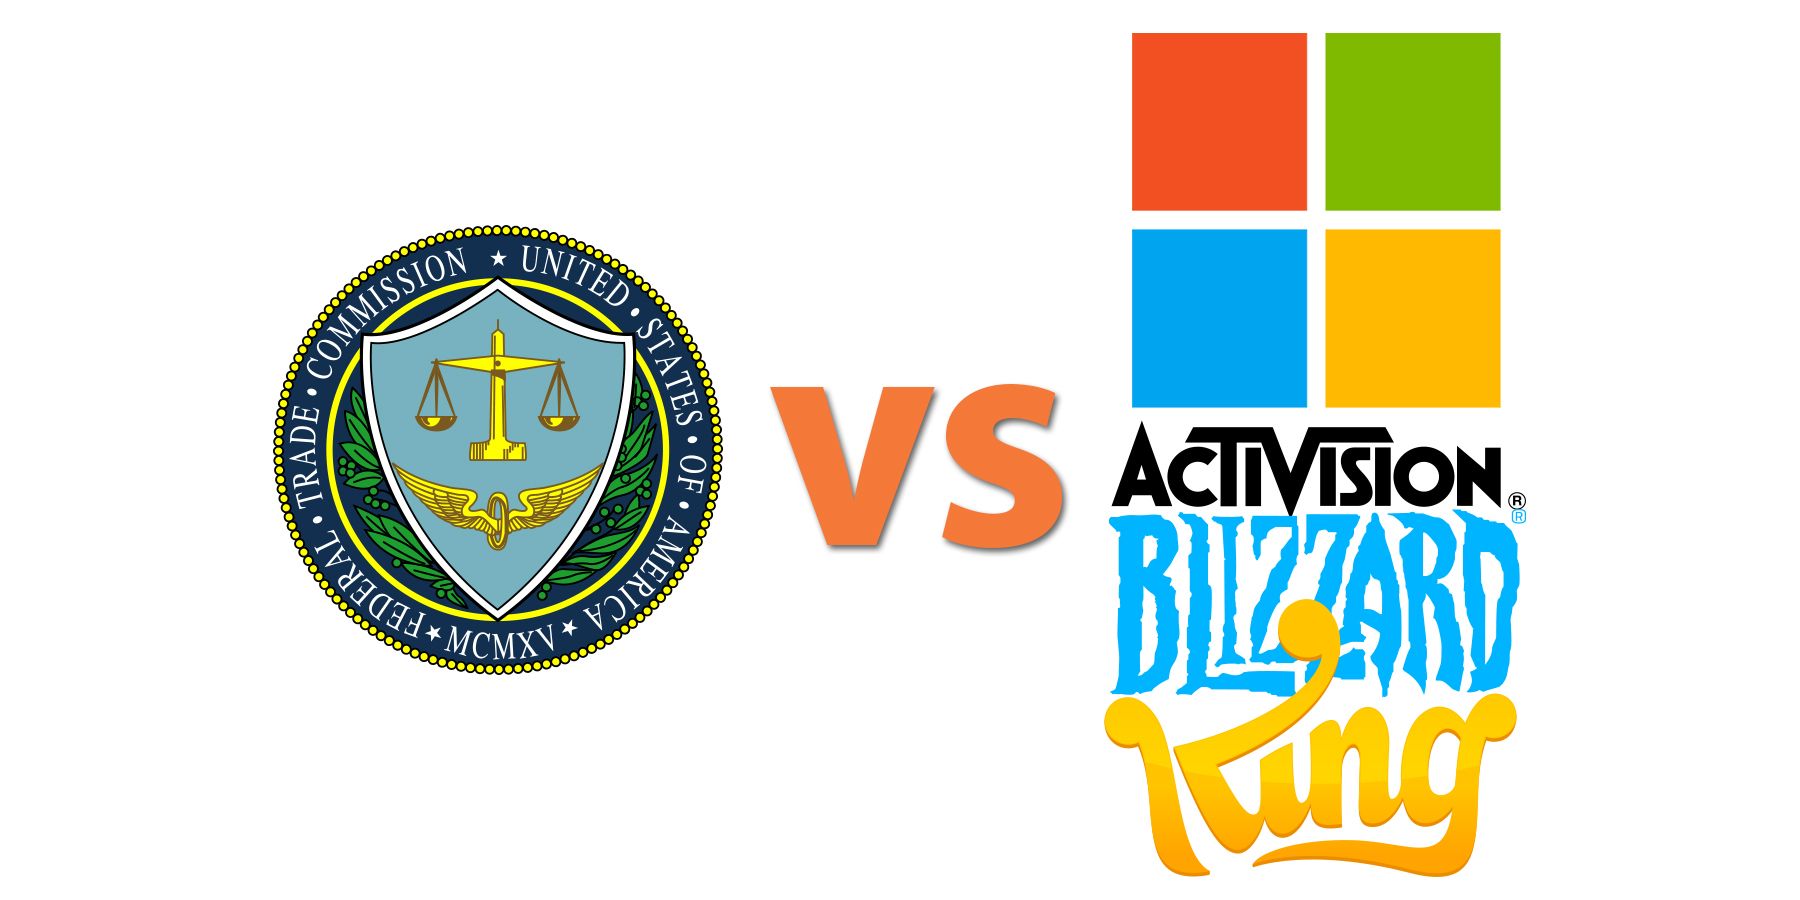 FTC vs Microsoft court hearing on Activision Acquisition: All major  announcements (Day 5)